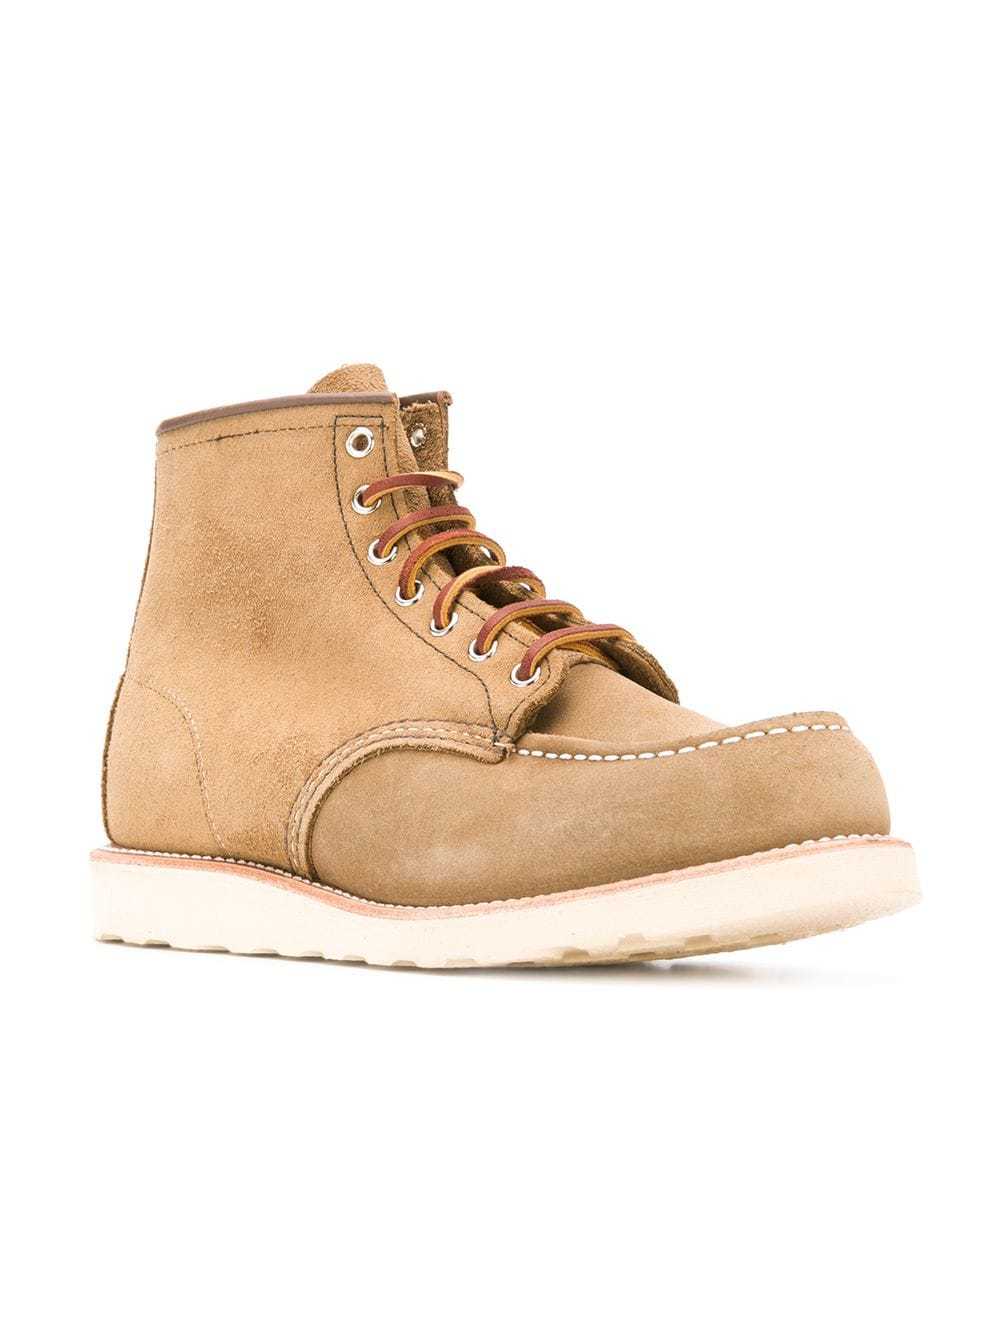 Red Wing Shoes 8881 6 Classic Moc Toe Mohave Boots, $358 | farfetch.com | Lookastic